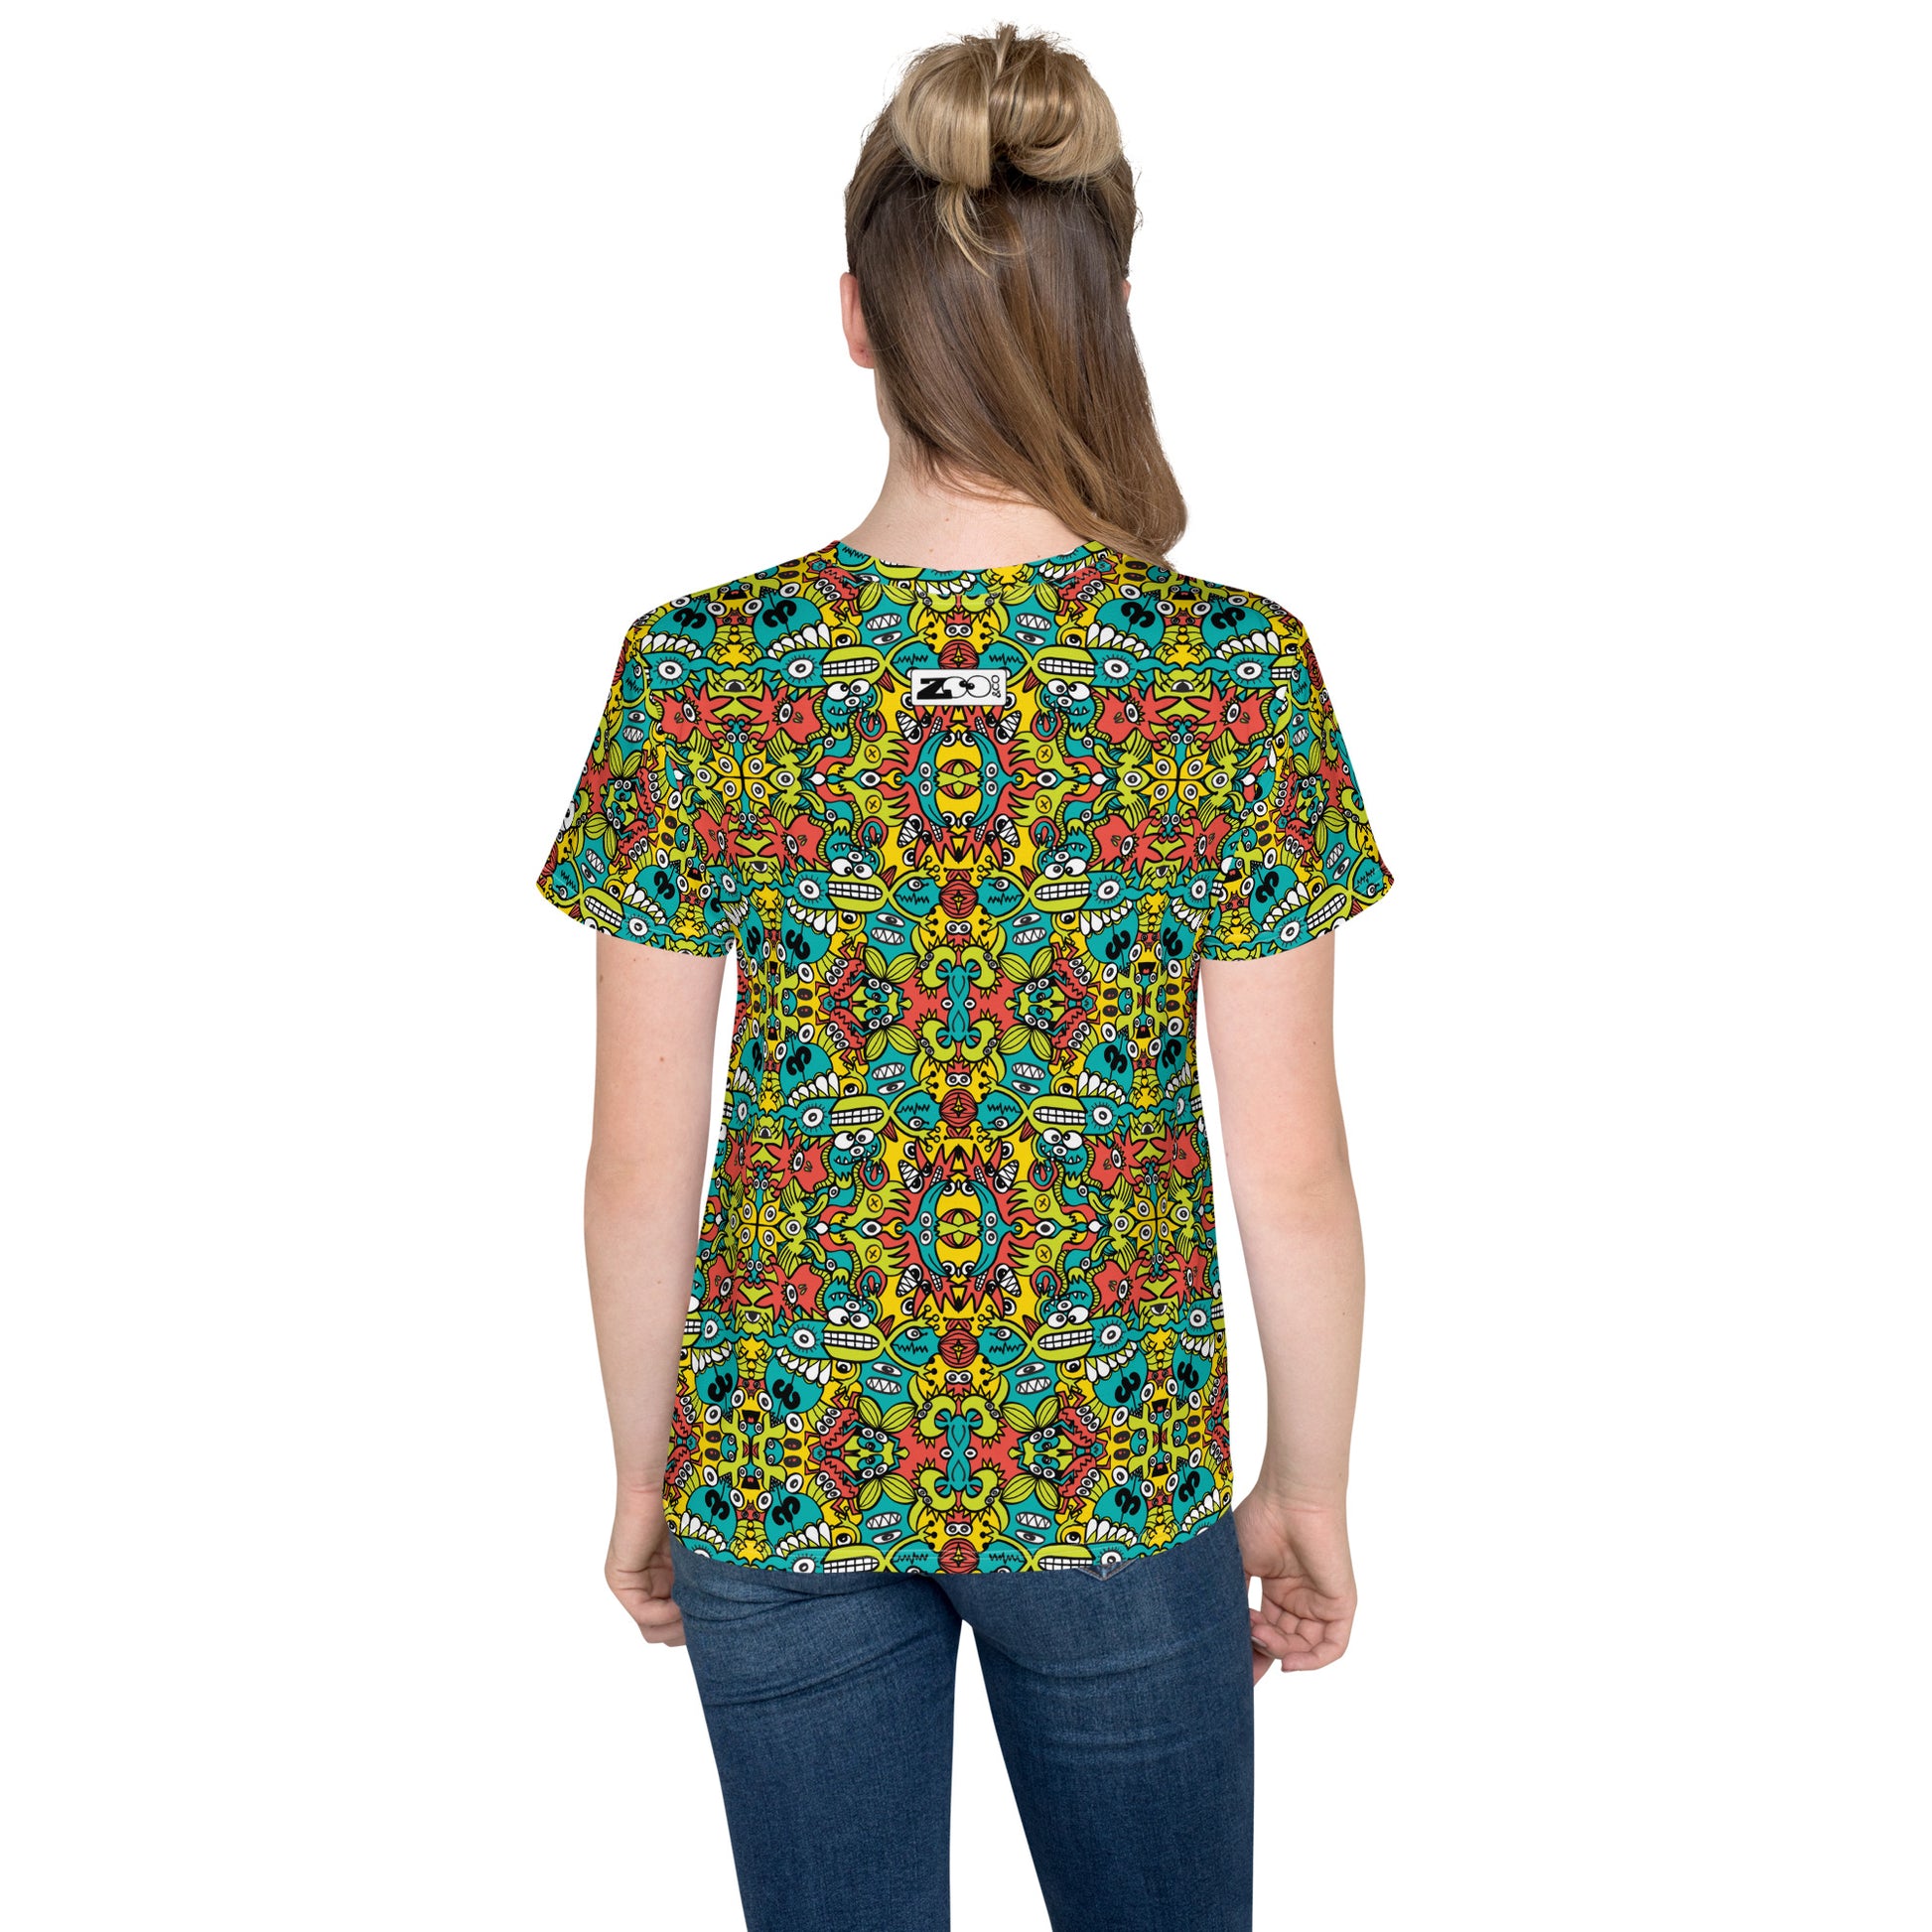 Doodle Dreamscape: Cosmic Critter Carnival - Youth crew neck t-shirt. Back view